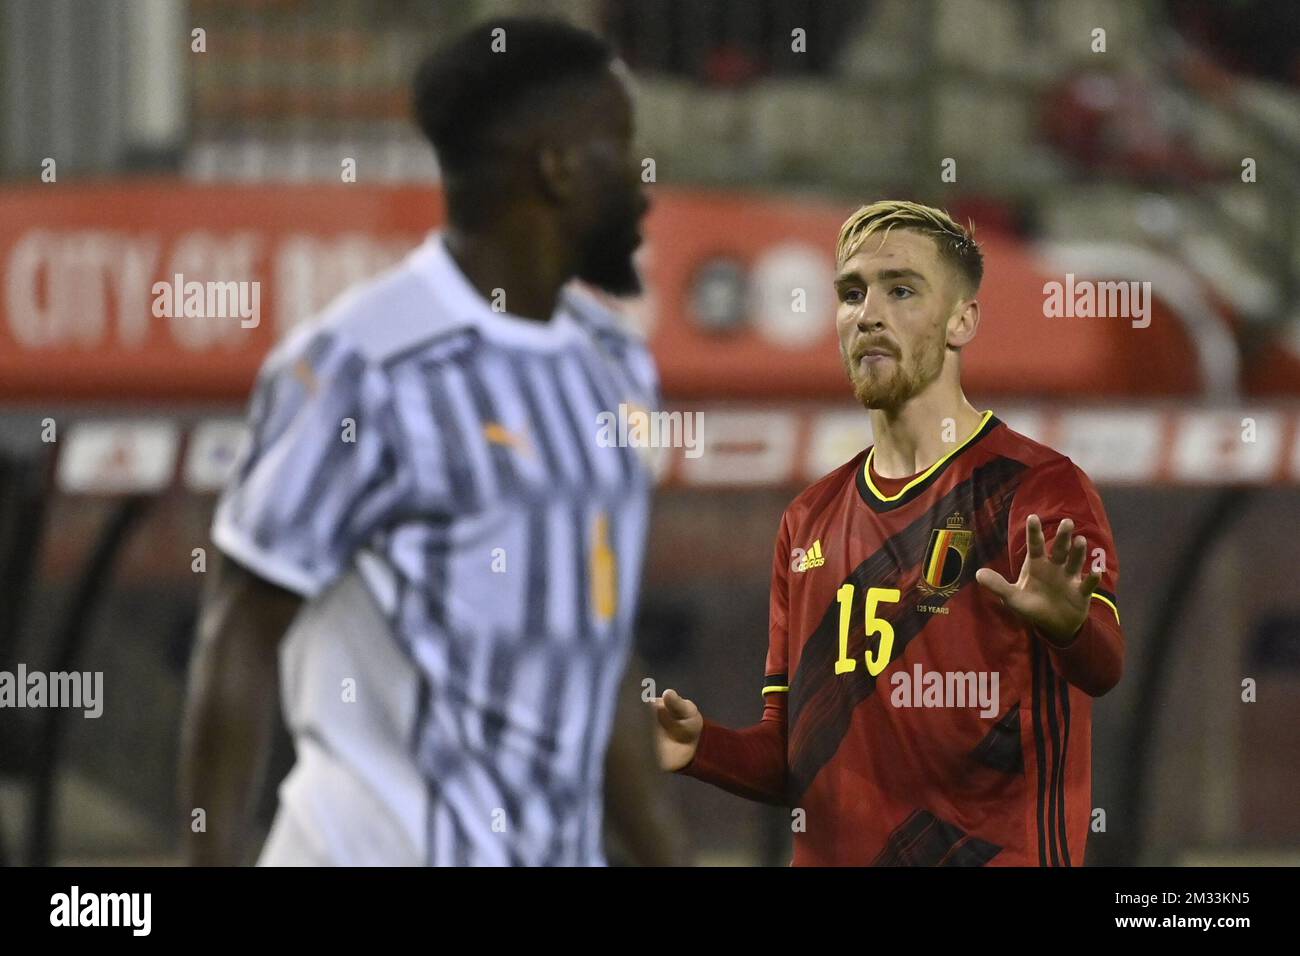 Belgium's Alexis Saelemaekers pictured t a friendly game between the Belgian national soccer team Red Devils and Ivory Coast, Thursday 08 October 2020 in Brussels. BELGA PHOTO DIRK WAEM  Stock Photo